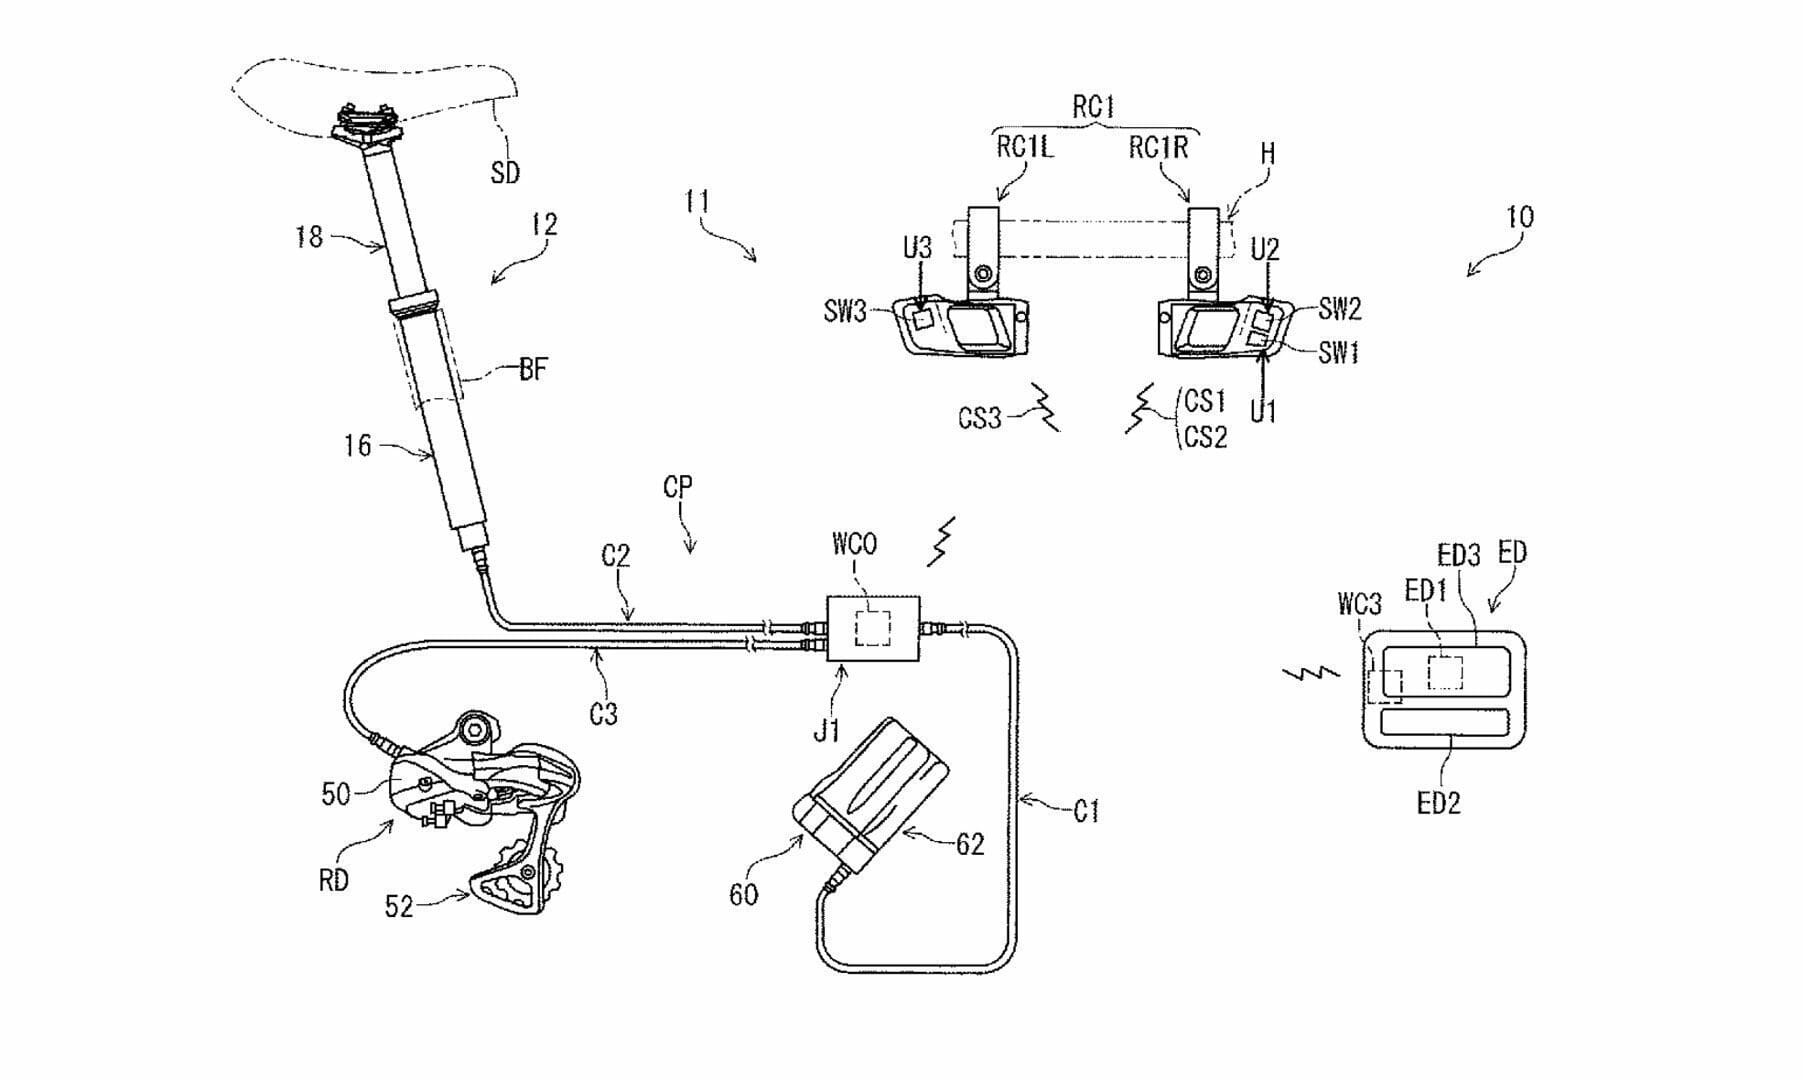 Shimano Patents a new Electronic Dropper Post